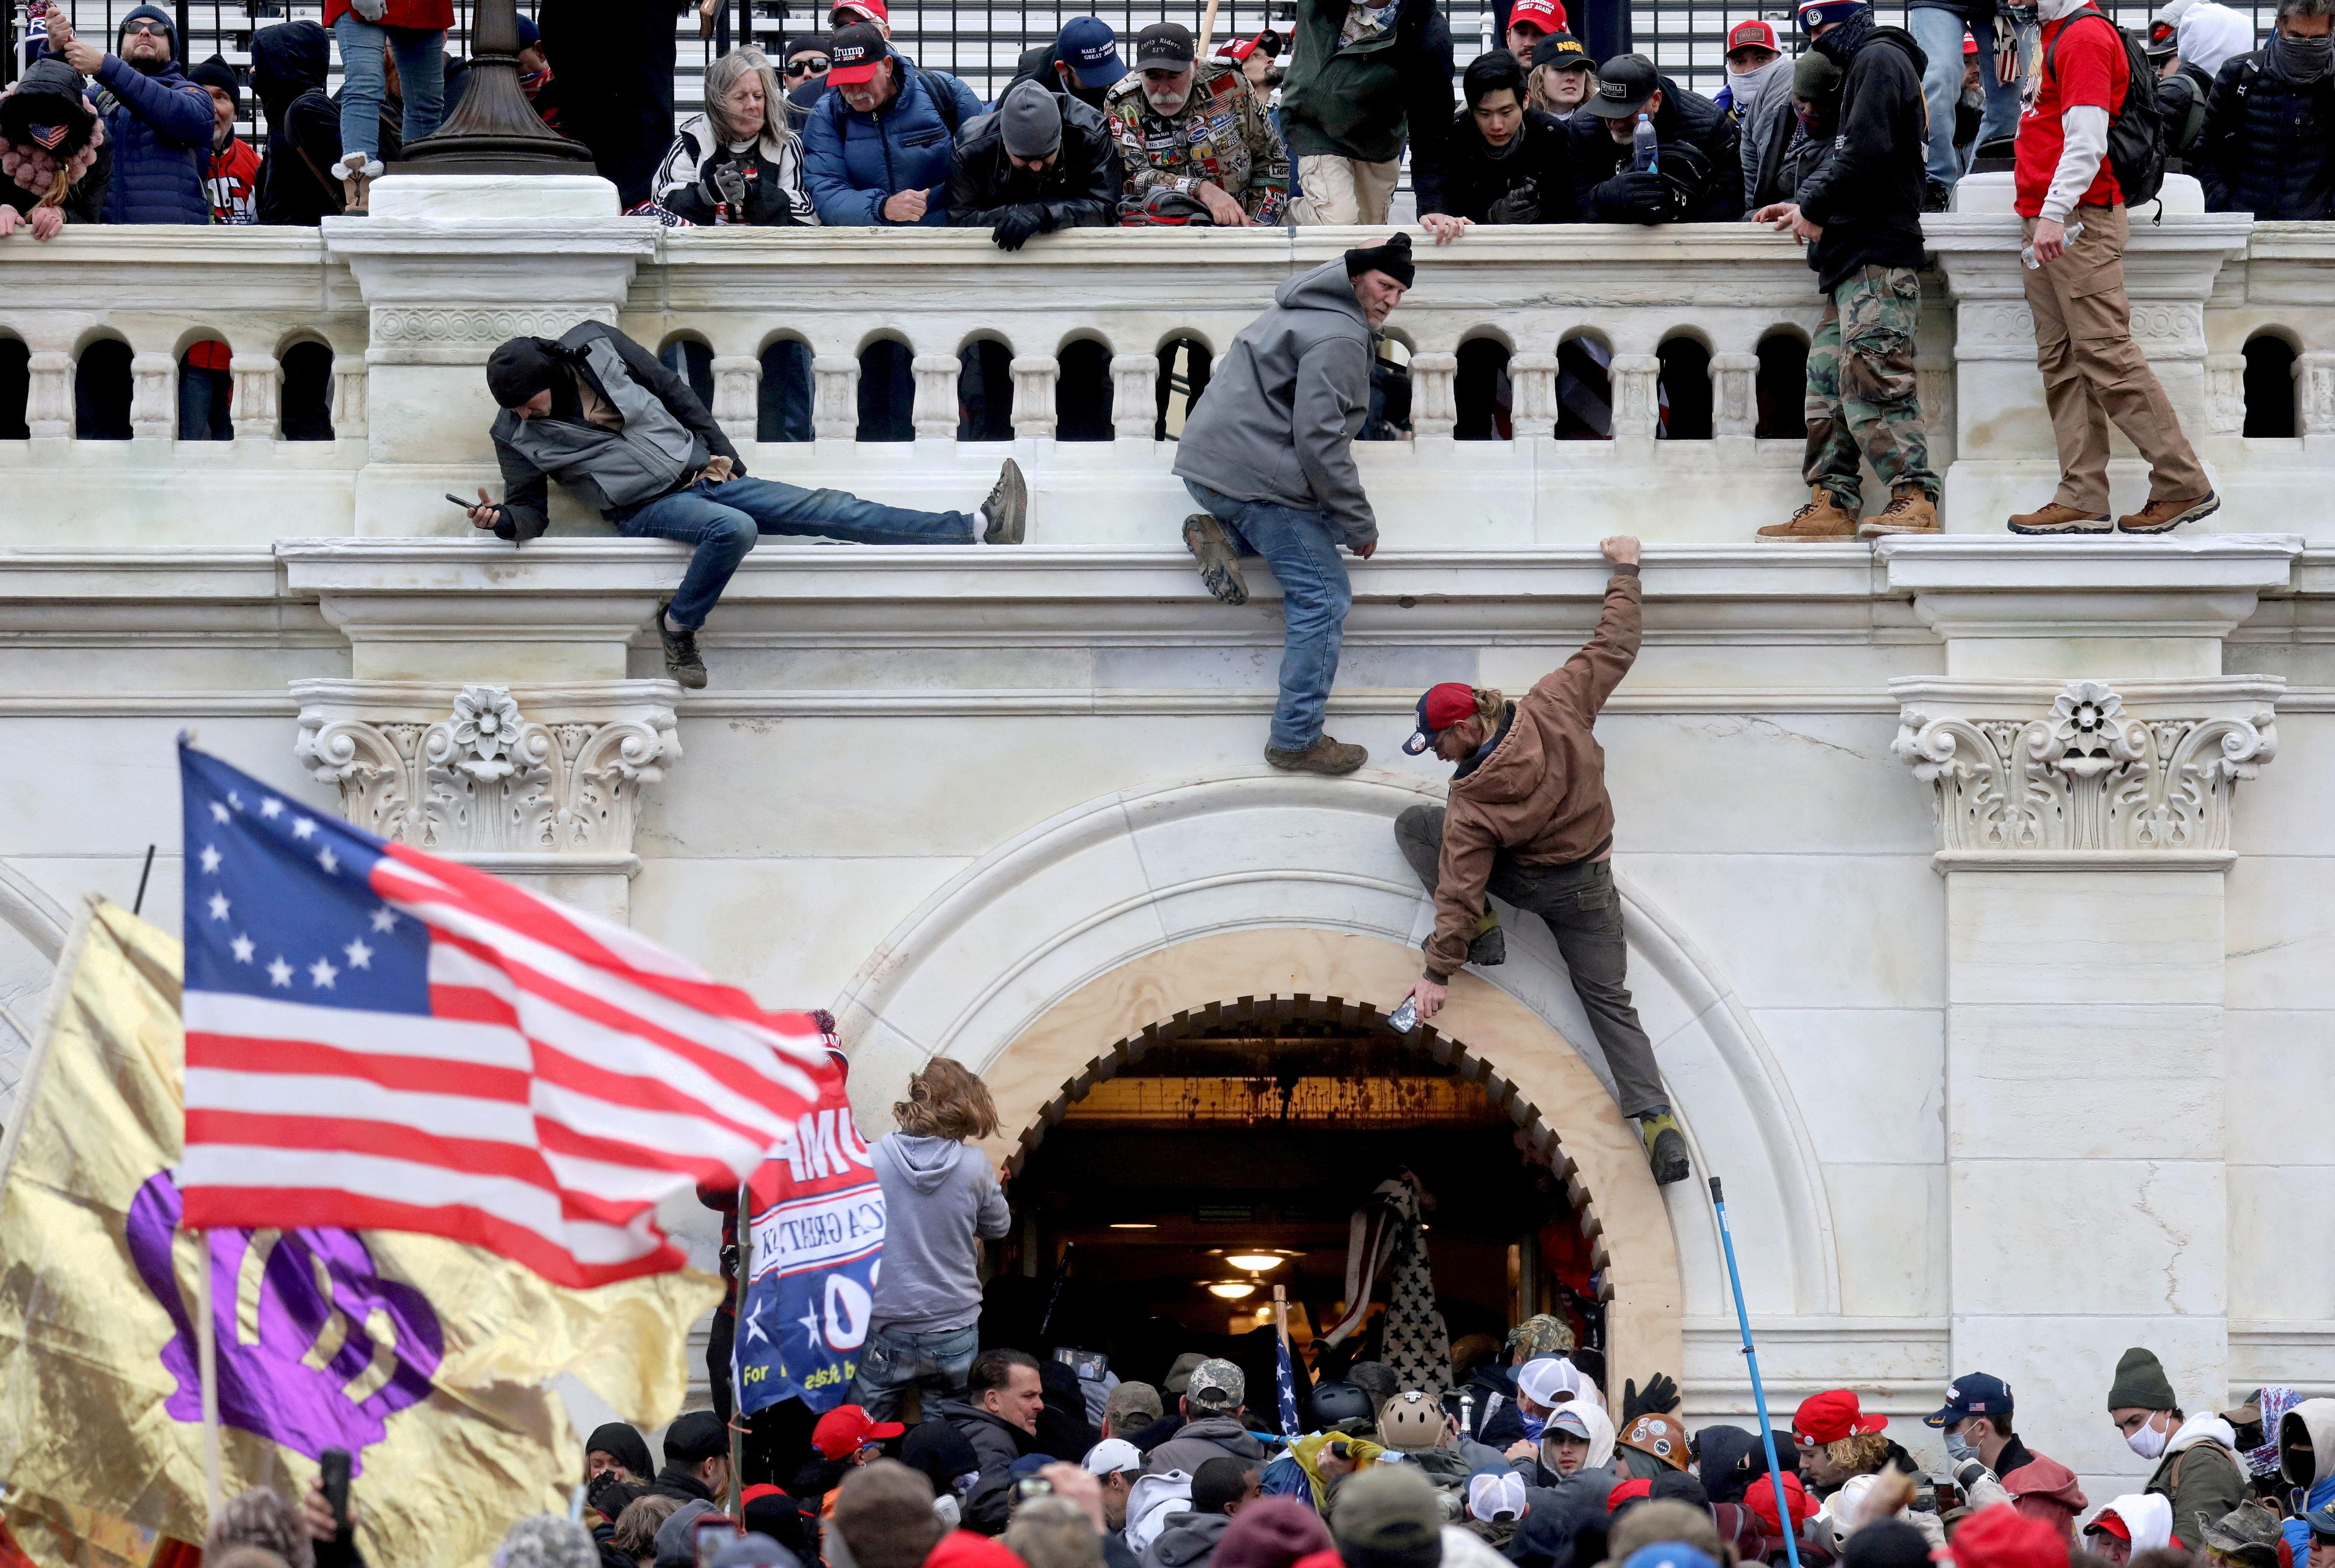 U.S. Capitol Building is stormed by a pro-Trump mob on Jan. 6, 2021